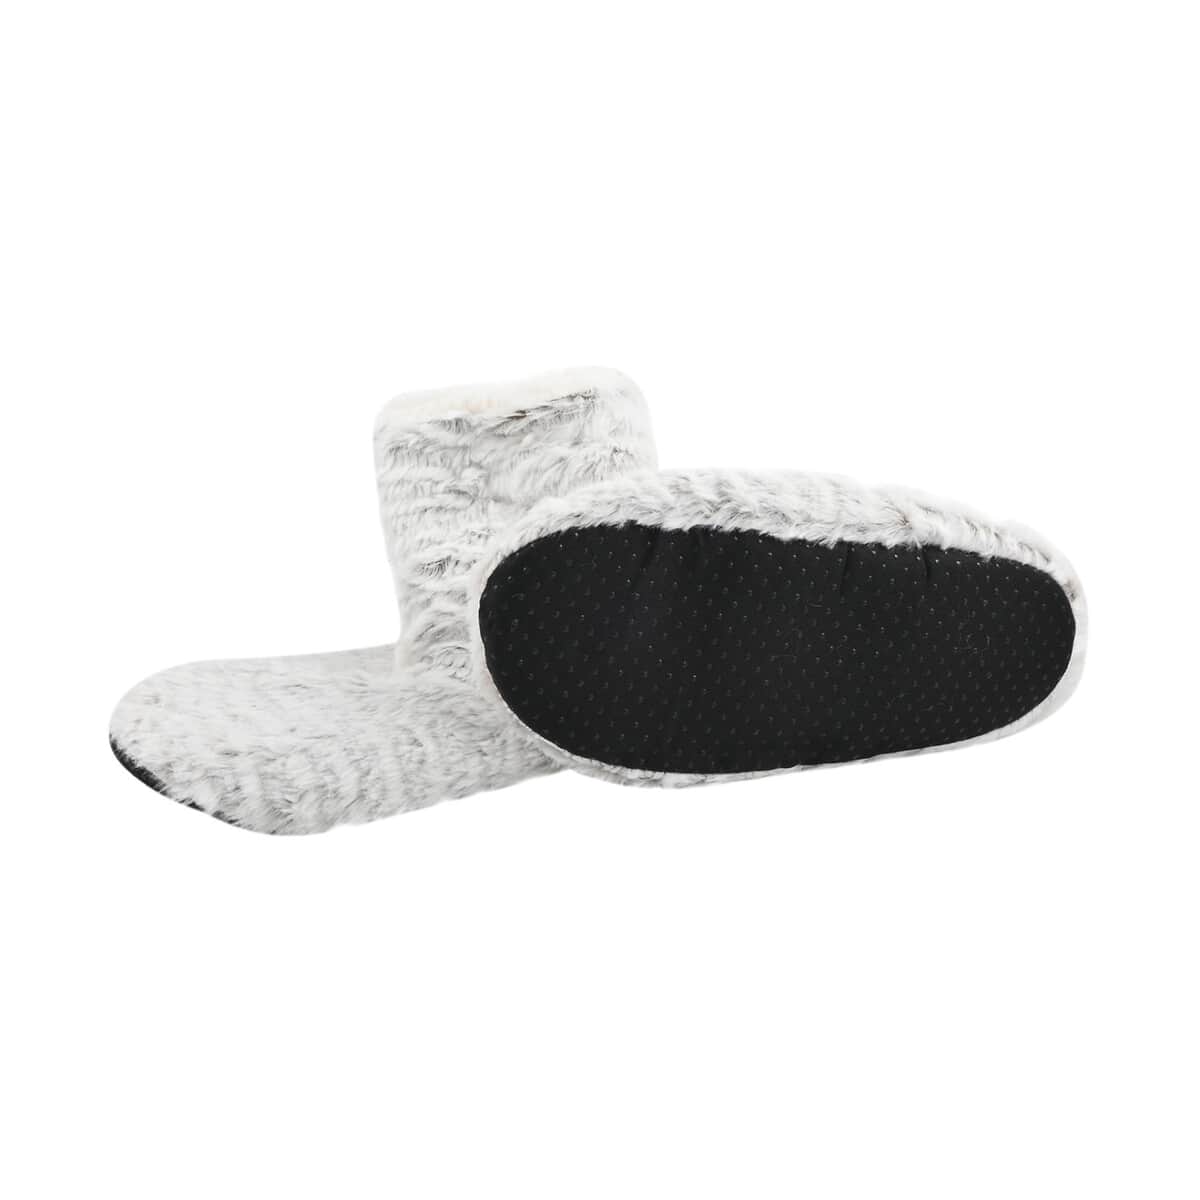 HOMESMART Light Gray Microfiber Faux Fur, Sherpa Booties and Matching Ballerina Slippers (Women's Size 5-10) image number 3